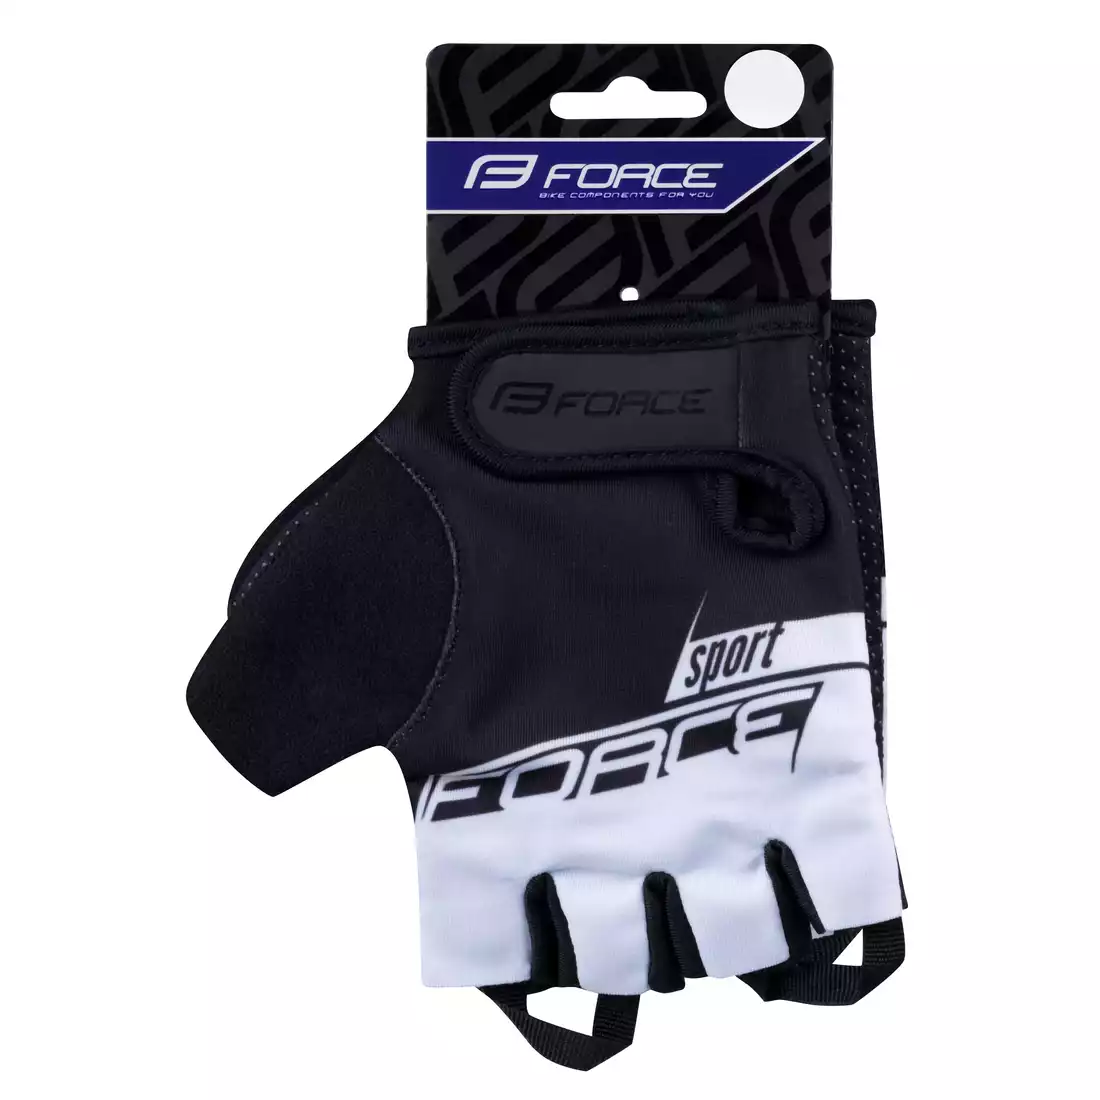 FORCE SPORT Cycling gloves, black and white